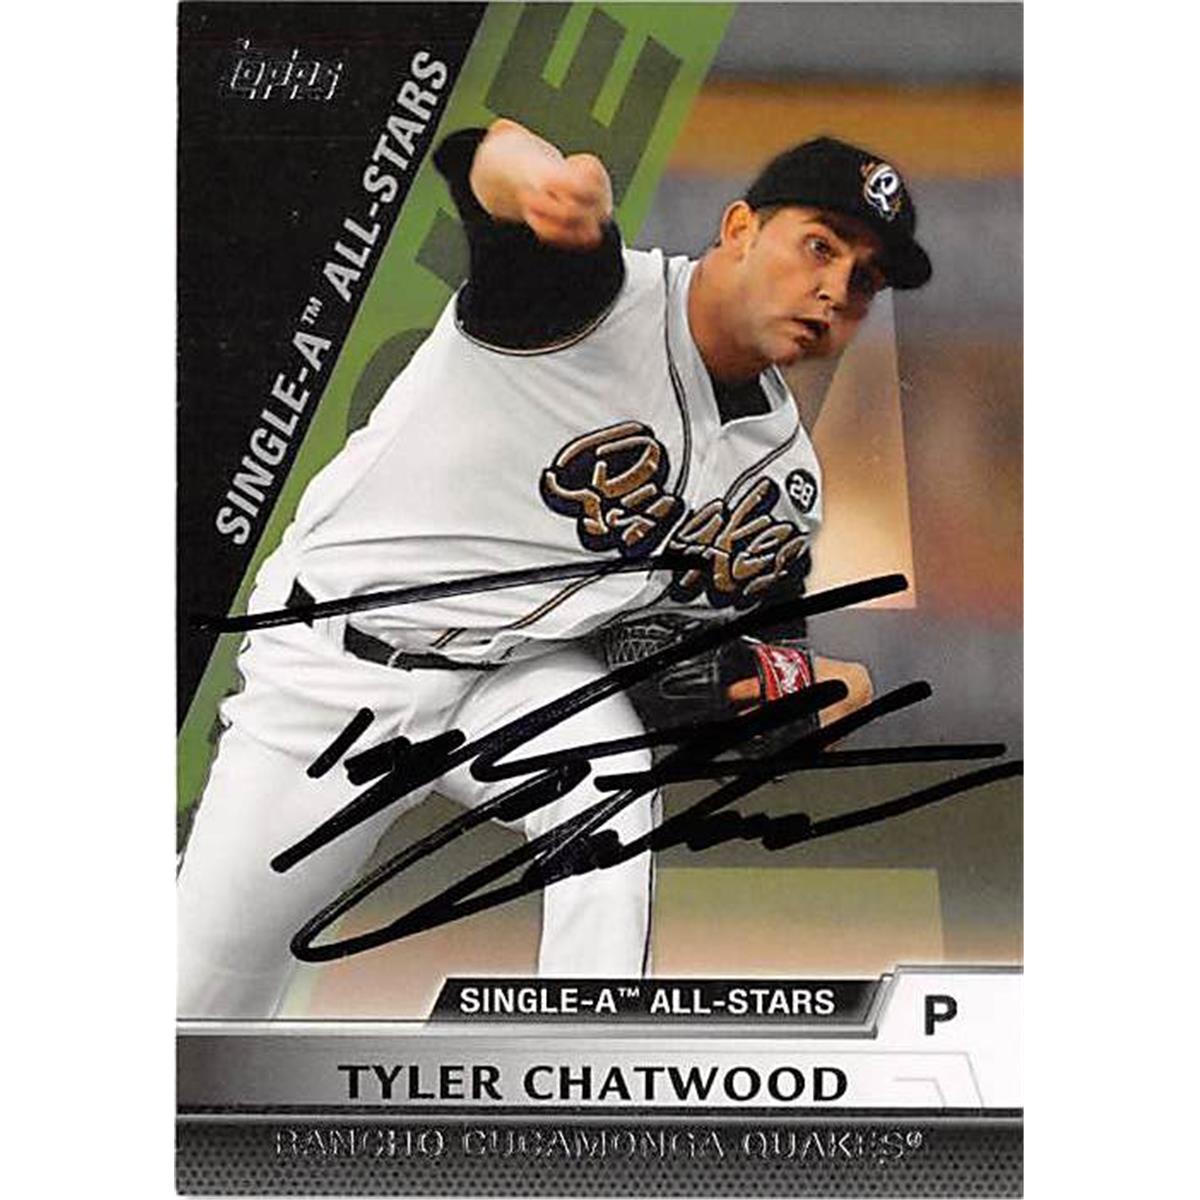 Picture of Autograph Warehouse 365638 Tyler Chatwood Autographed Baseball Card - 2011 Topps Pro Debut SA45